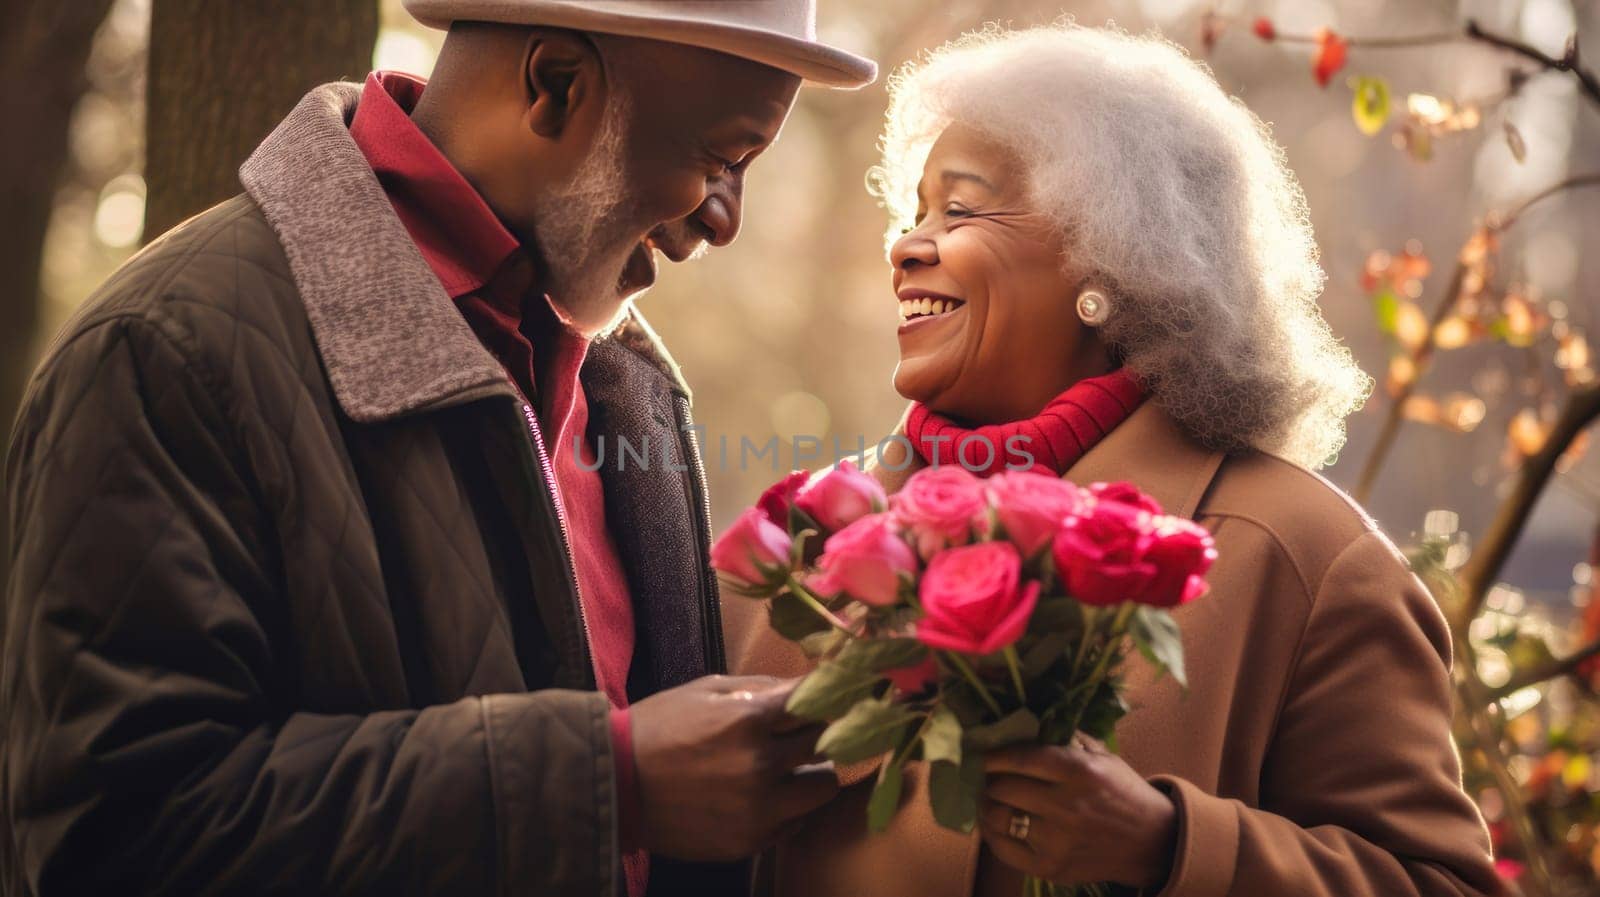 An elderly African man gives his wife a large bouquet of roses for Valentine's Day by Alla_Yurtayeva